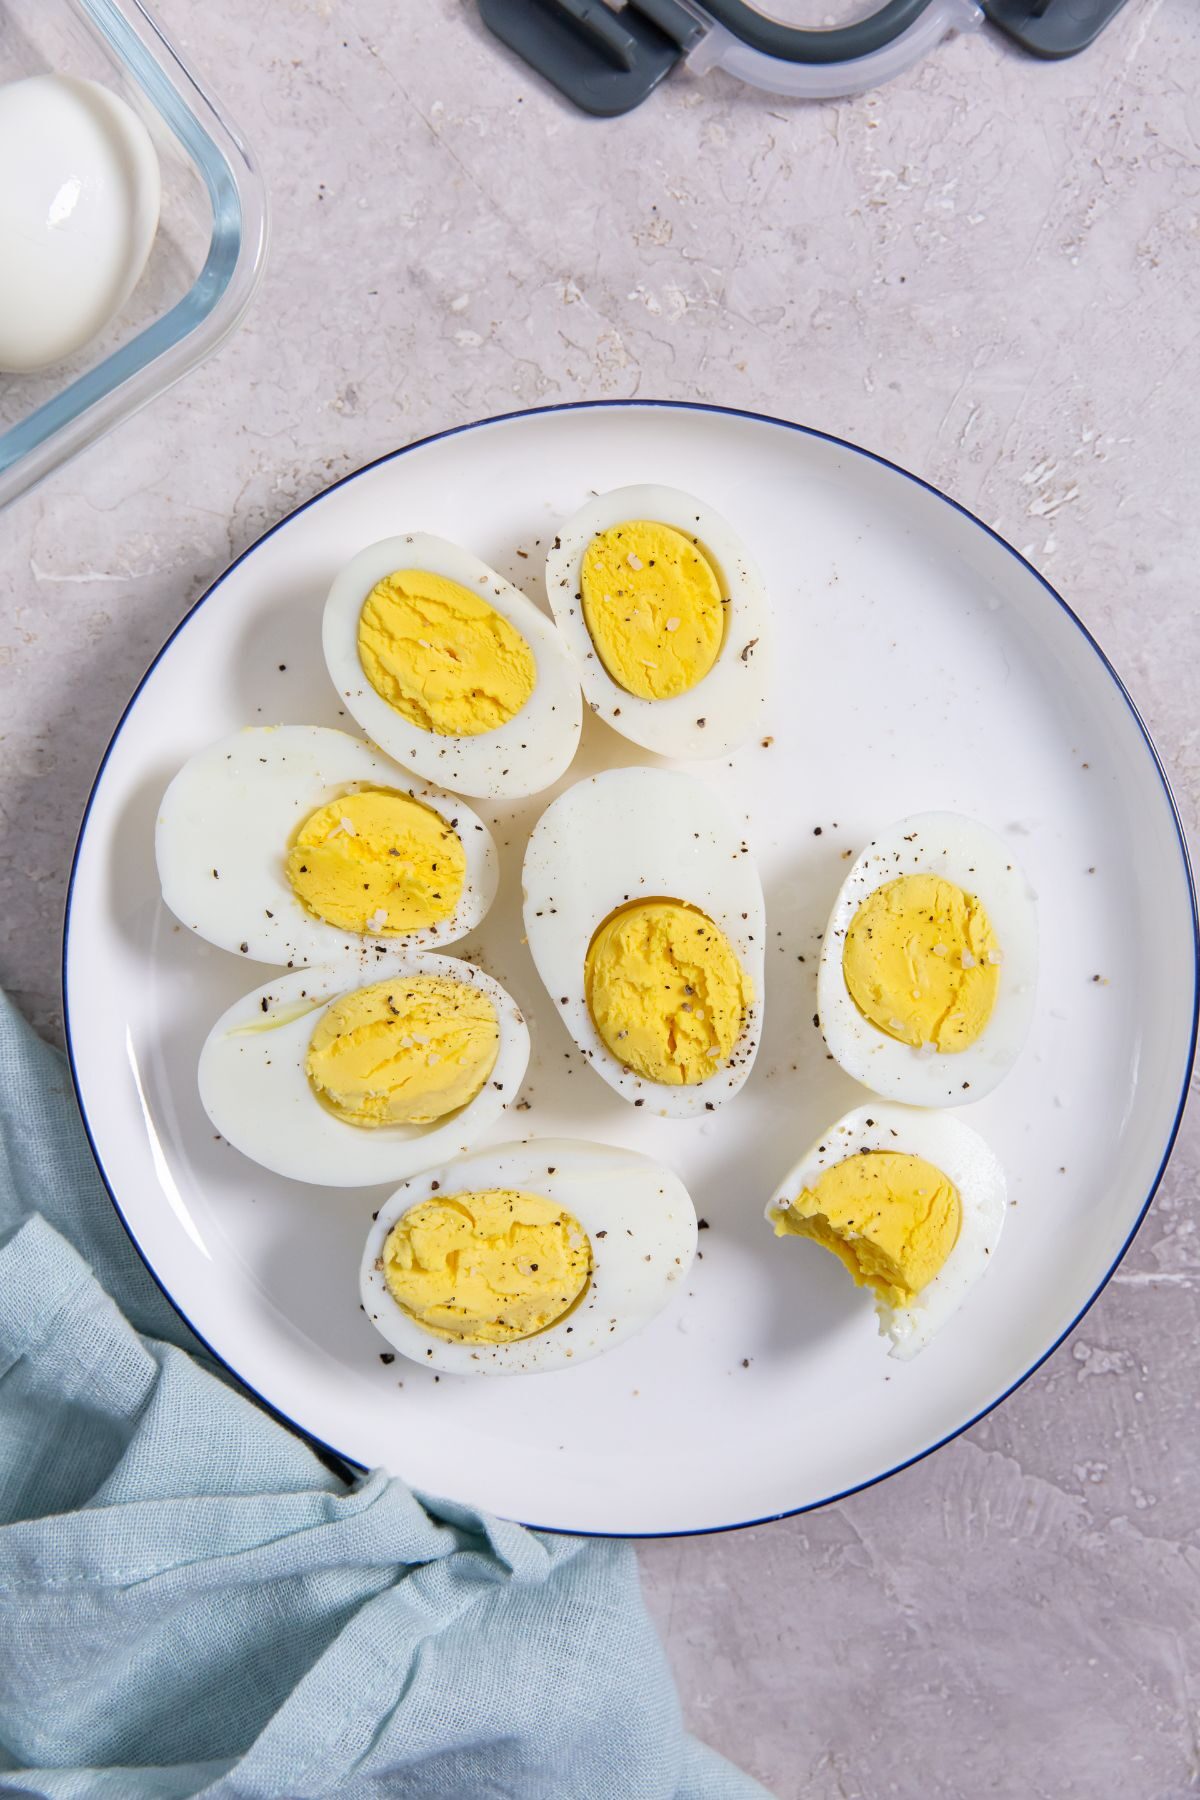 Instant Pot Eggs 5-5-5 Method cut in half on a white plate with a light blue napkin on the side